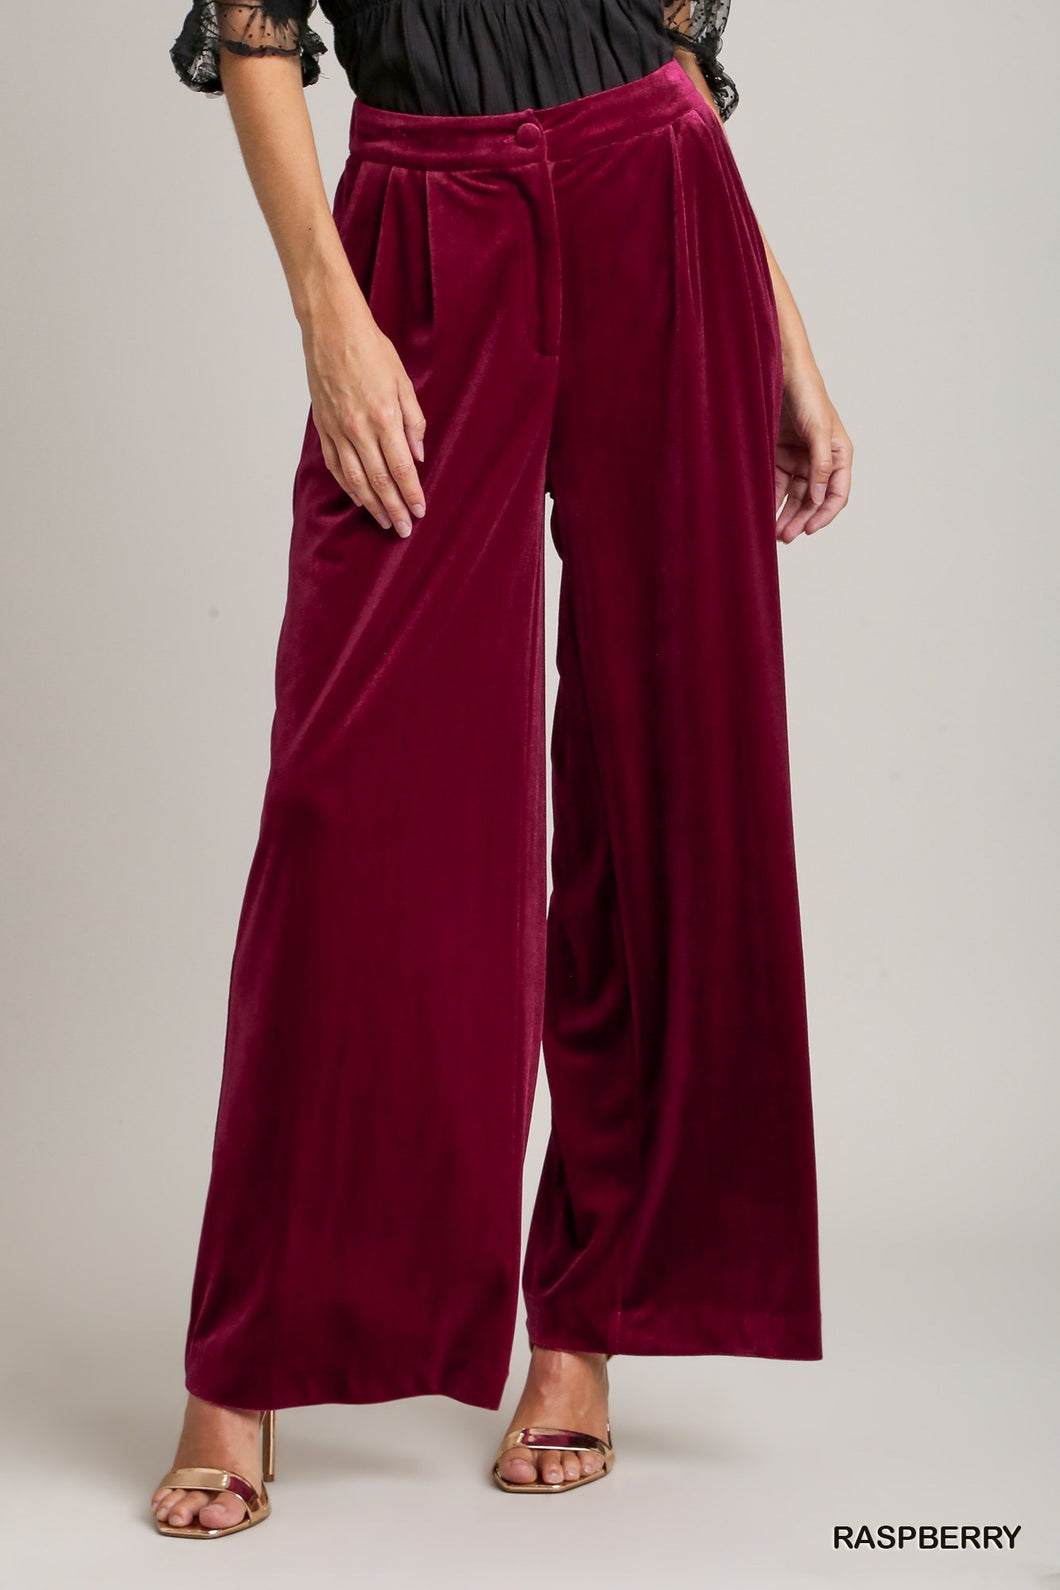 The Best Time of The Year Raspberry Velvet High Waisted Pleated Wide Leg Pants